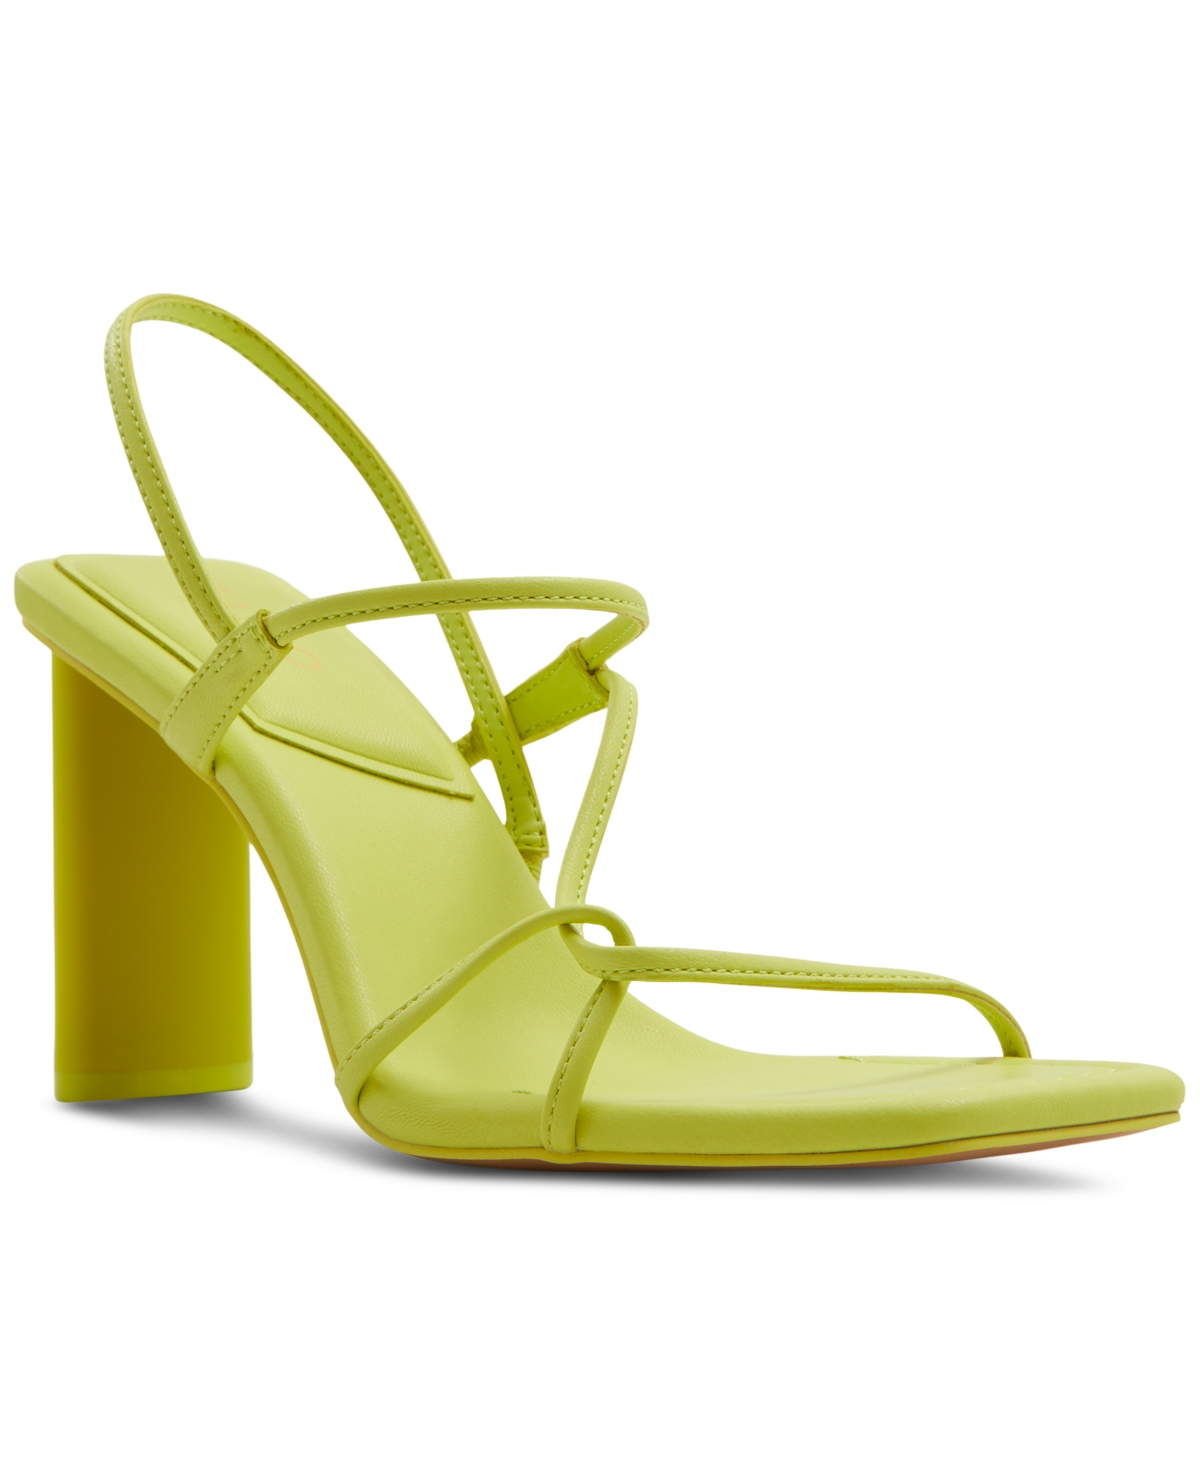 Women's Meagan Strappy Slingback Dress Sandals - Green Smooth